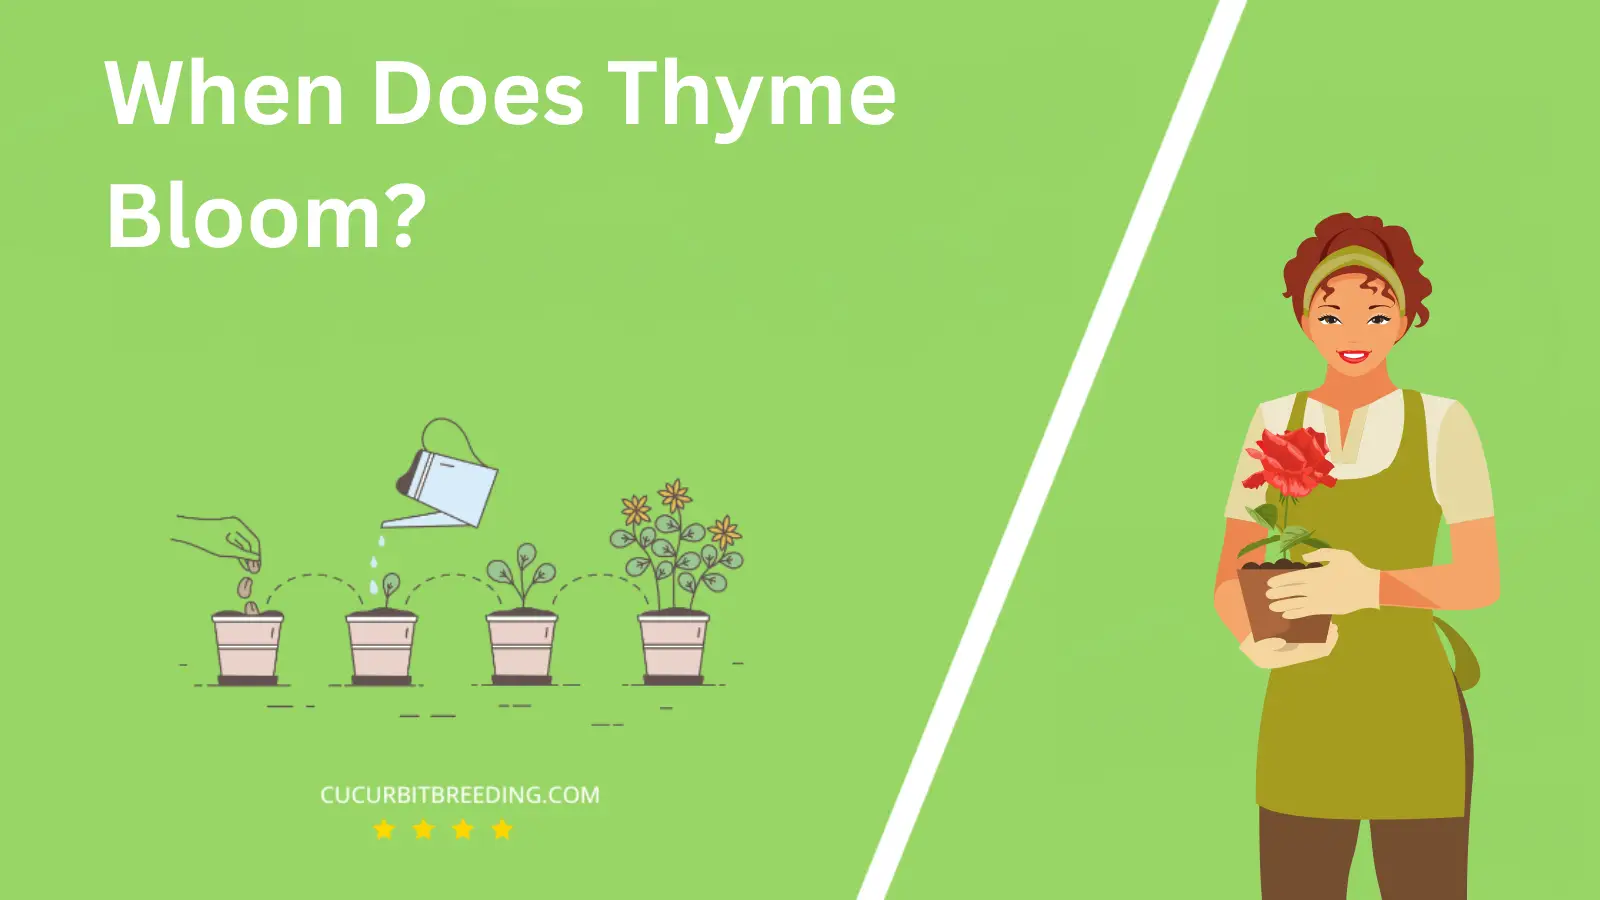 When Does Thyme Bloom?